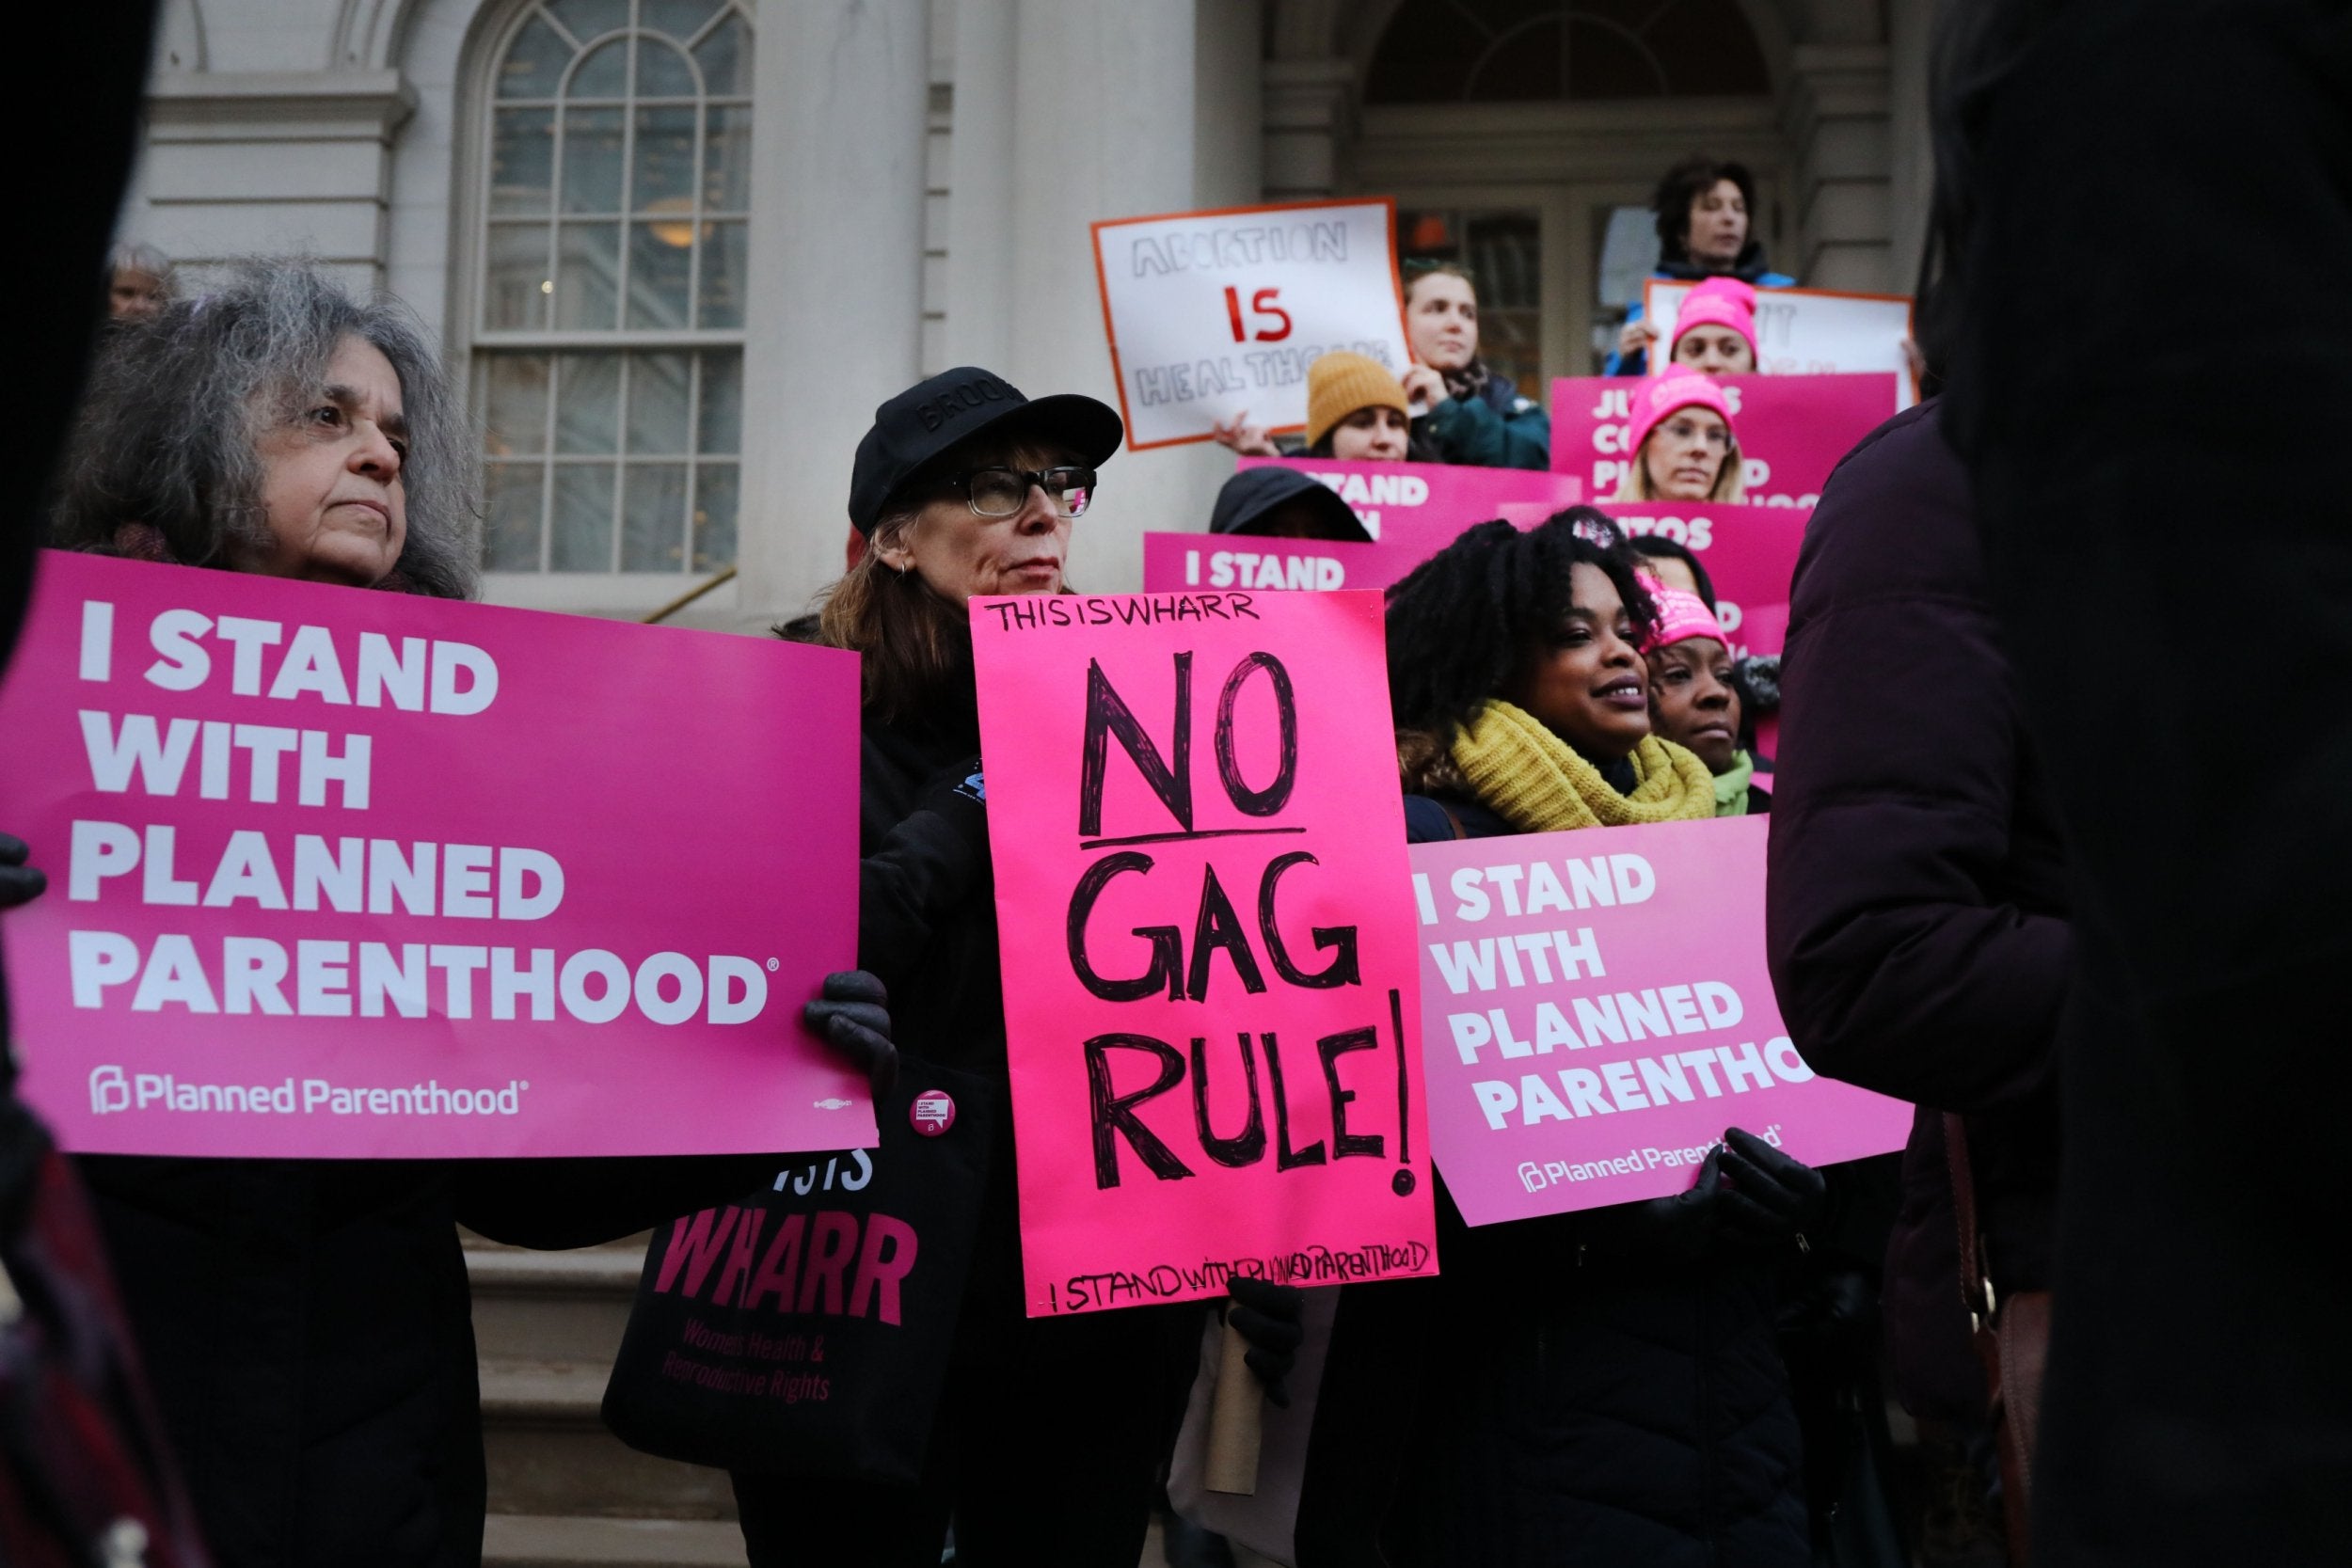 Pro-choice activists protest against the Trump administration's Planned Parenthood rule change policy in New York City